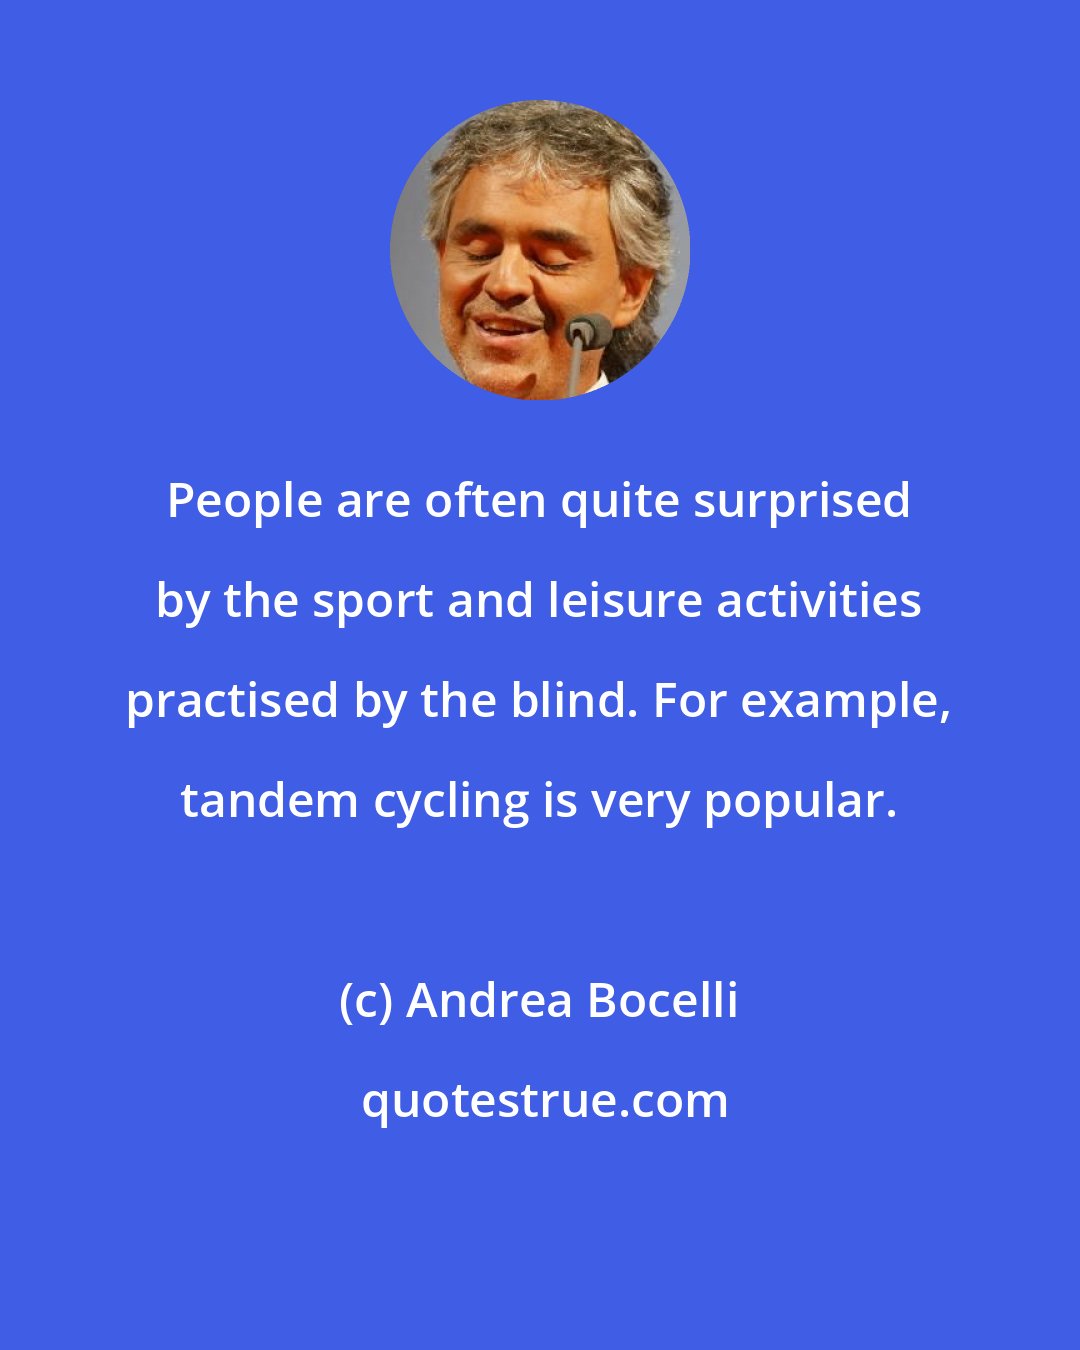 Andrea Bocelli: People are often quite surprised by the sport and leisure activities practised by the blind. For example, tandem cycling is very popular.